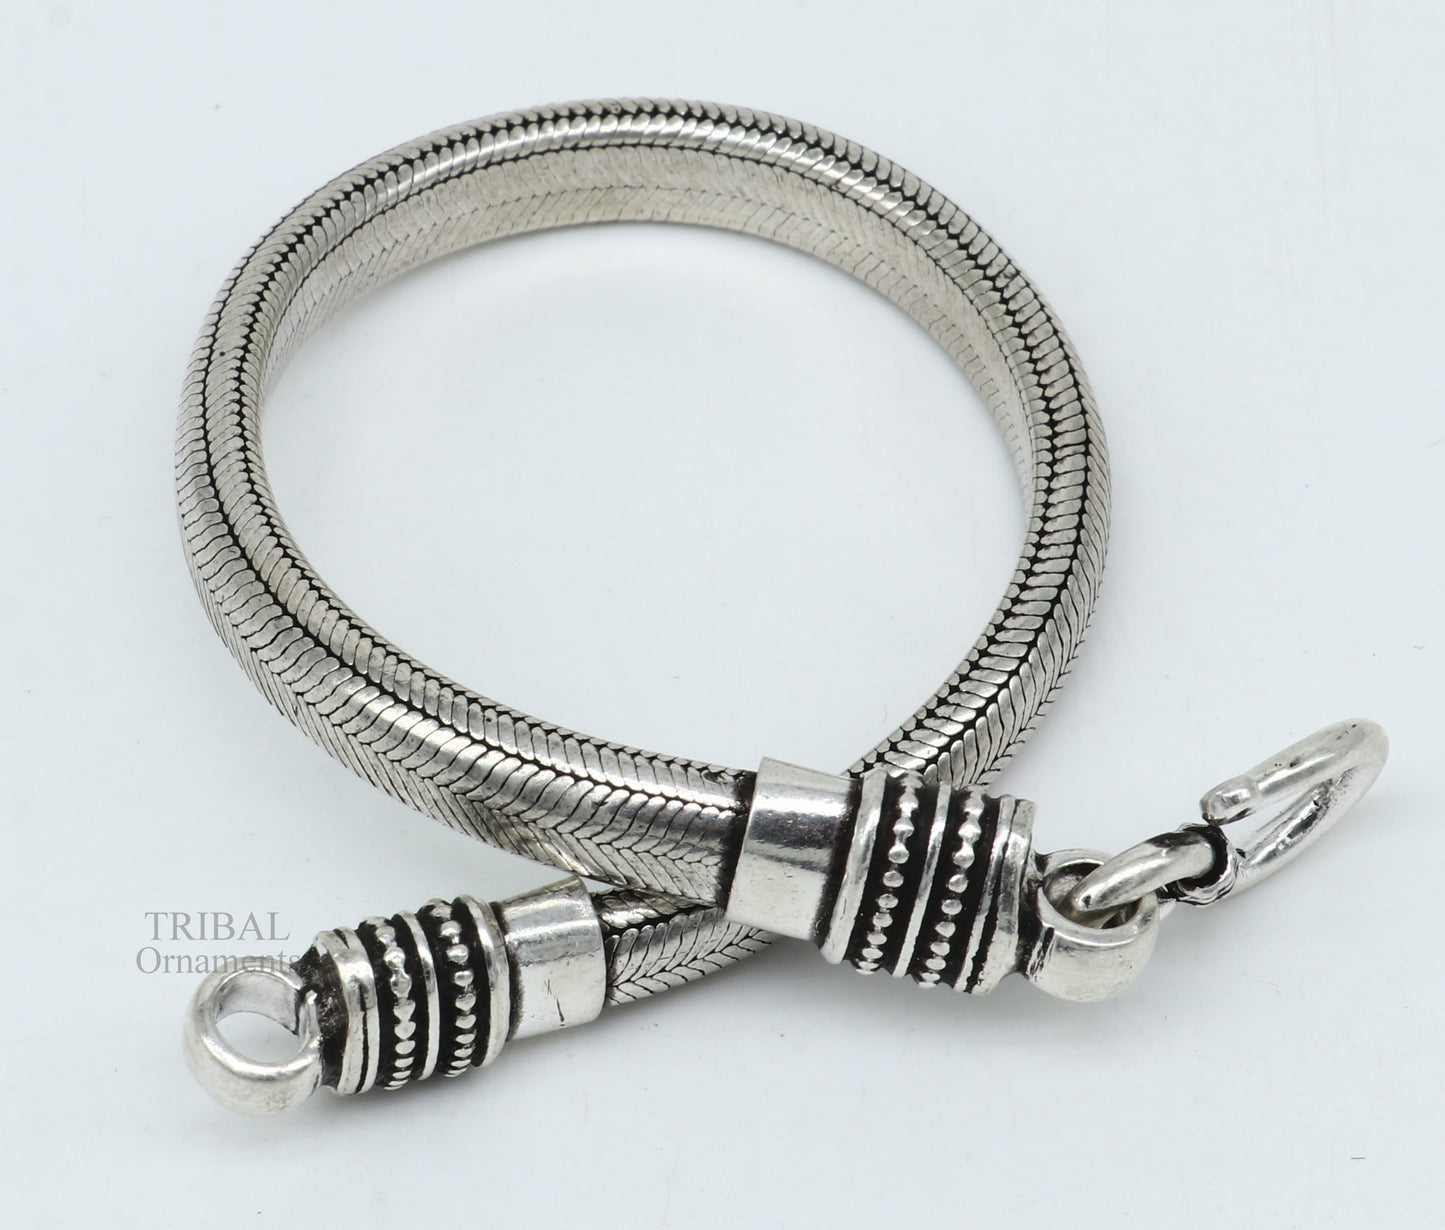 7mm 8" solid 925 sterling silver handmade snake chain heavy customized D shape half round bracelet, personalized gifting jewelry nsbr250 - TRIBAL ORNAMENTS